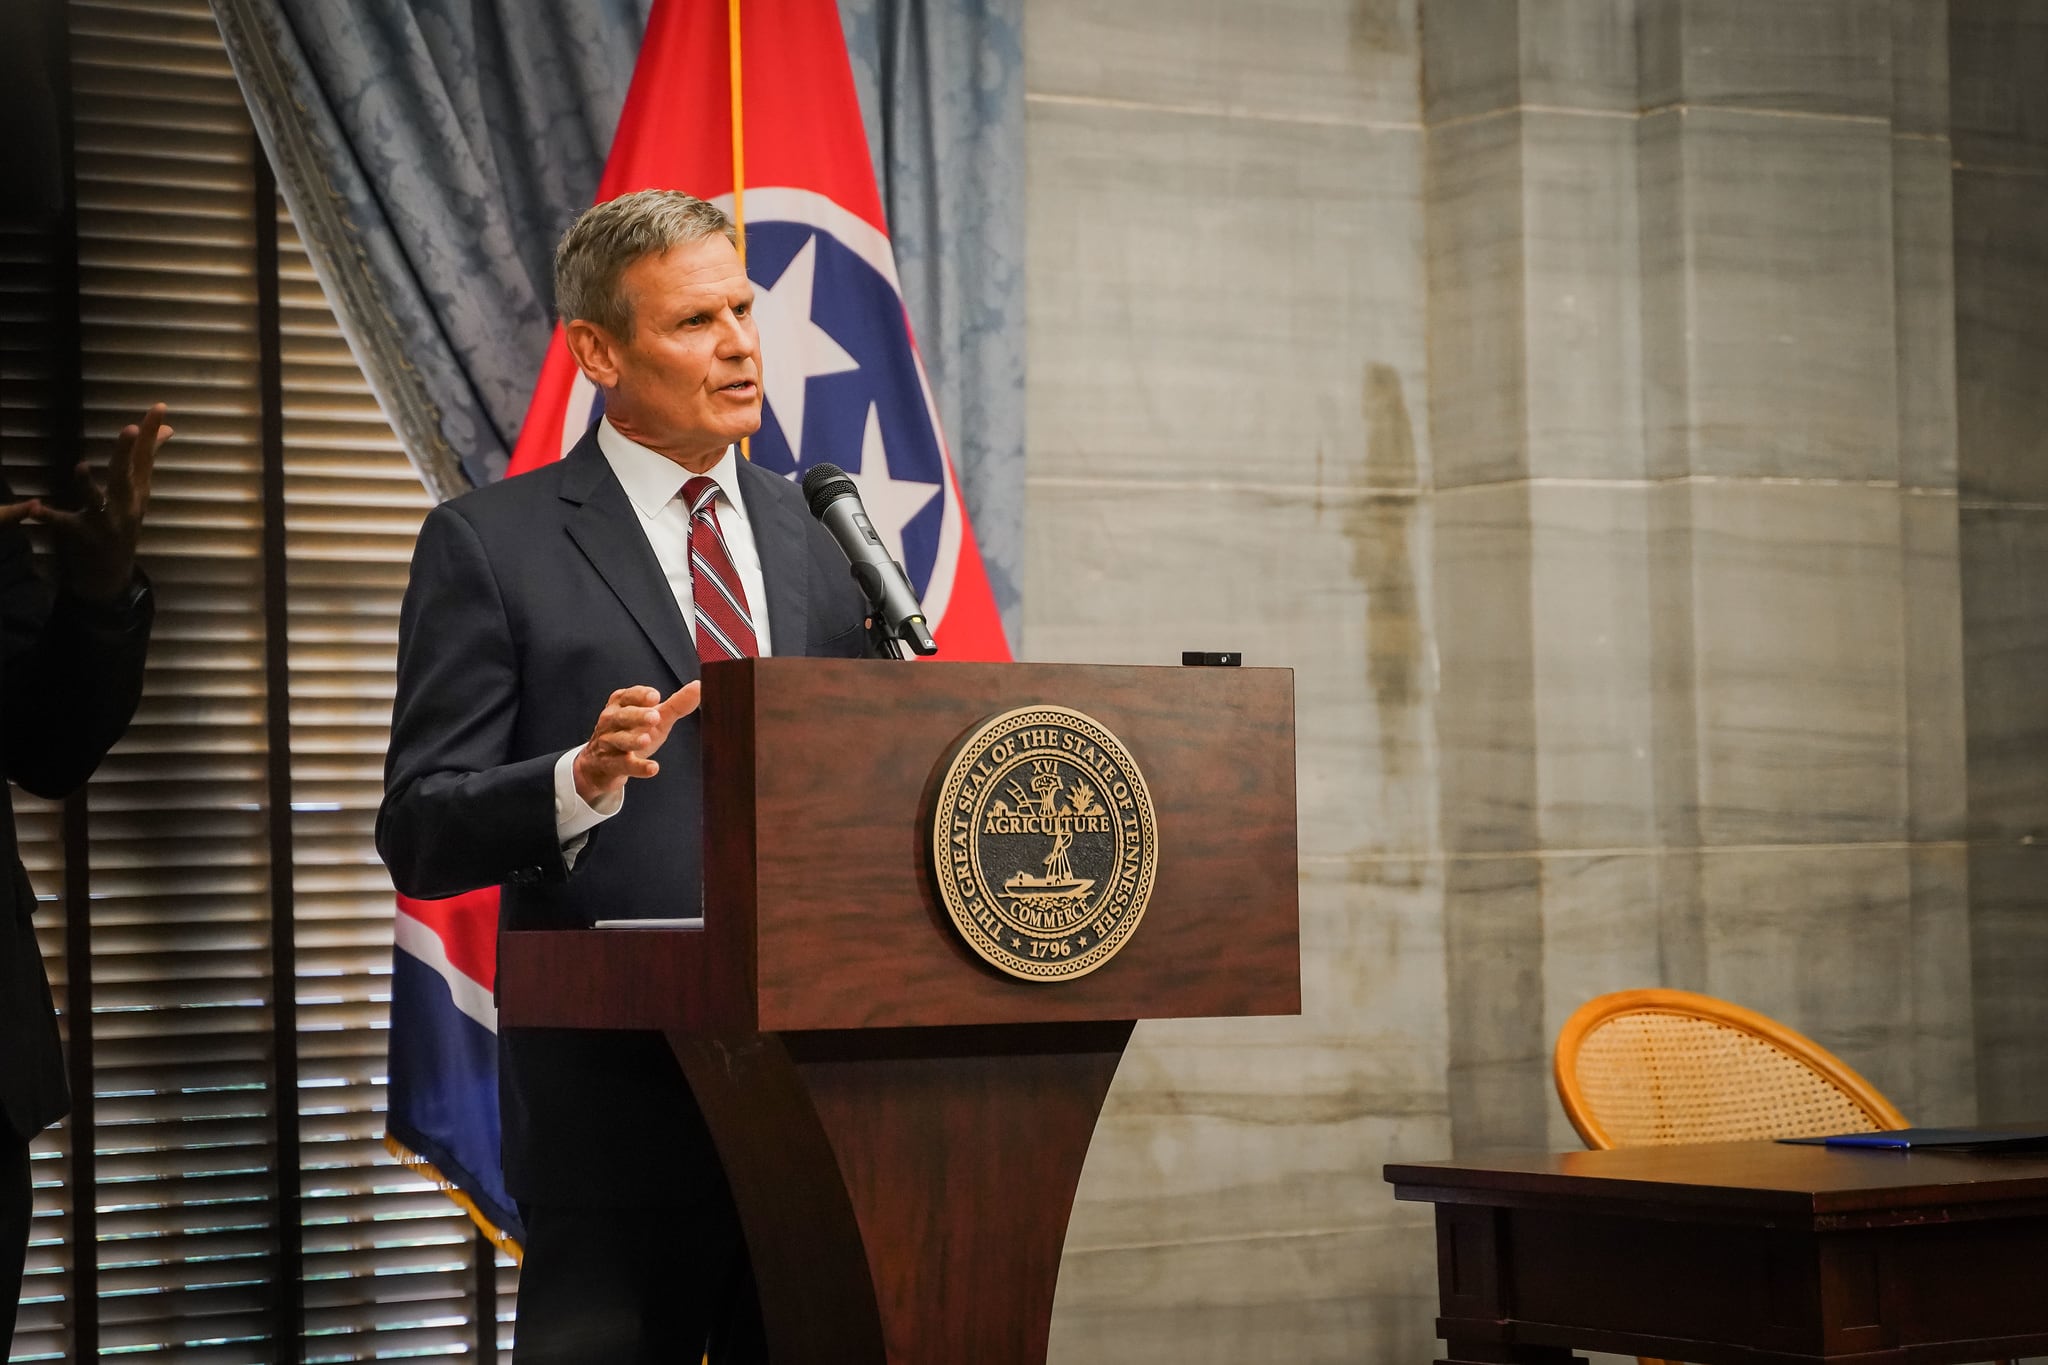 A man wearing a suit and tie speaks at a podium against the backdrop of the Tennessee state flag.